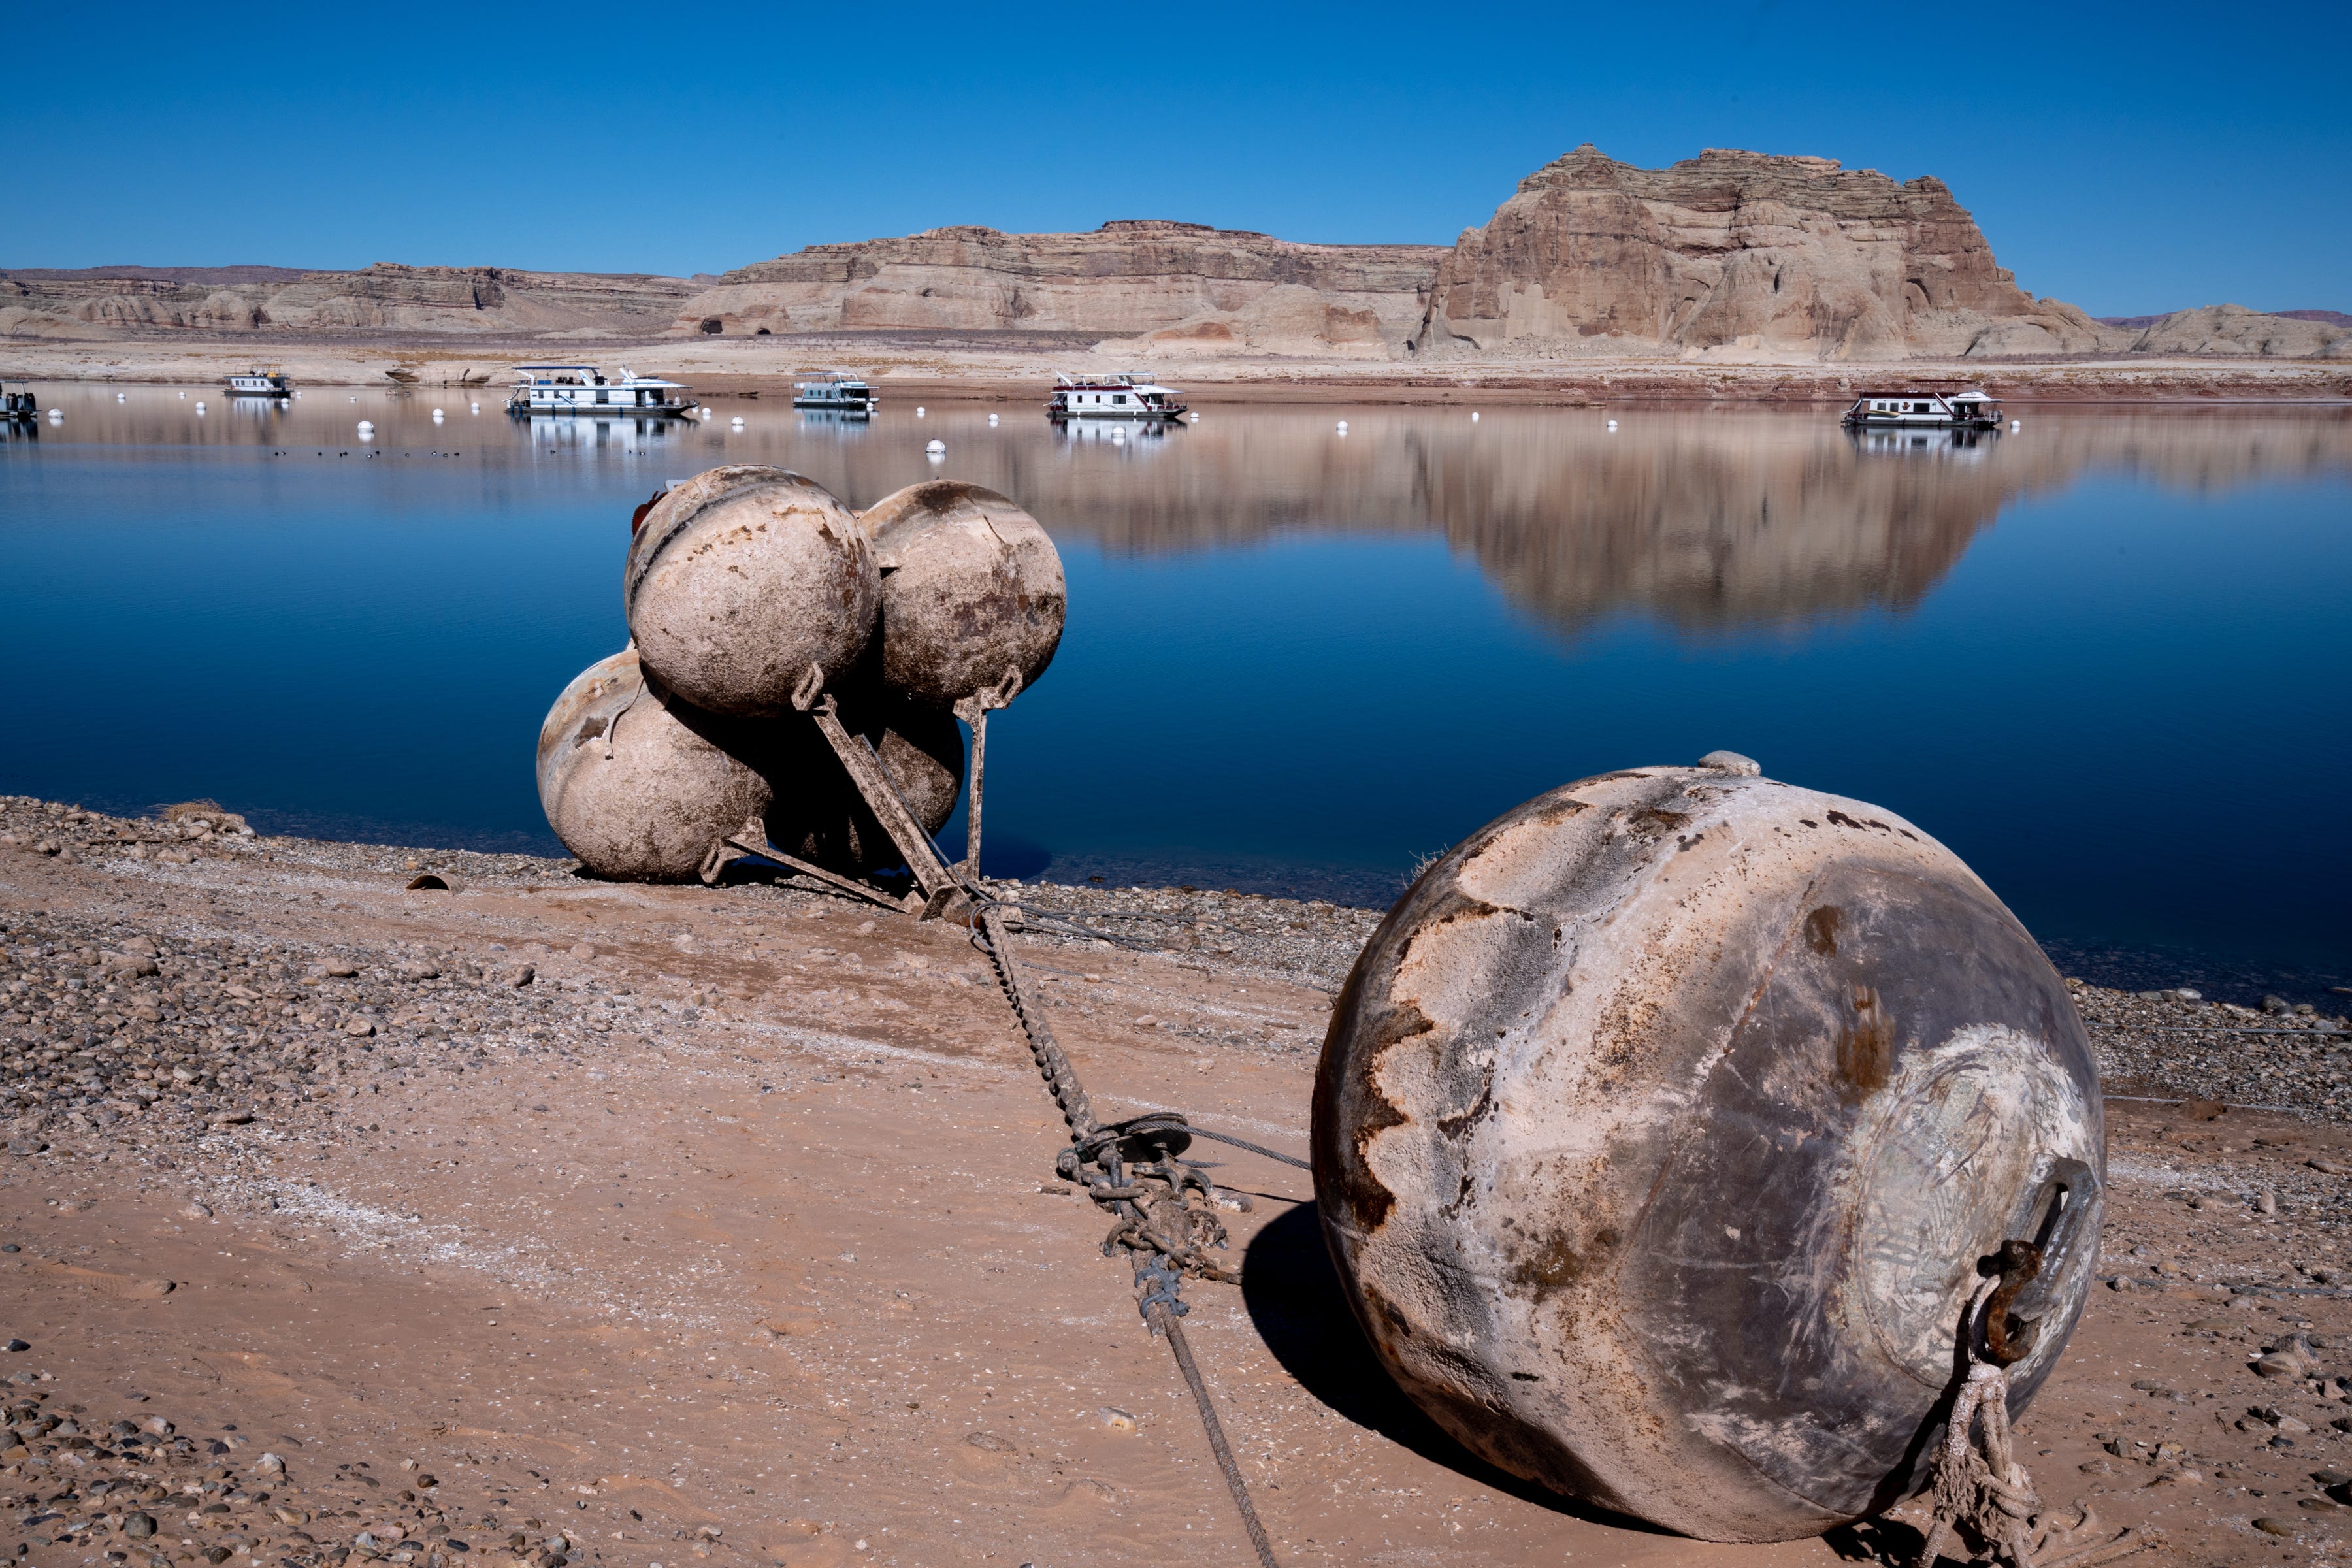 Long drought on the Colorado River shows in shrinking Lake Powell